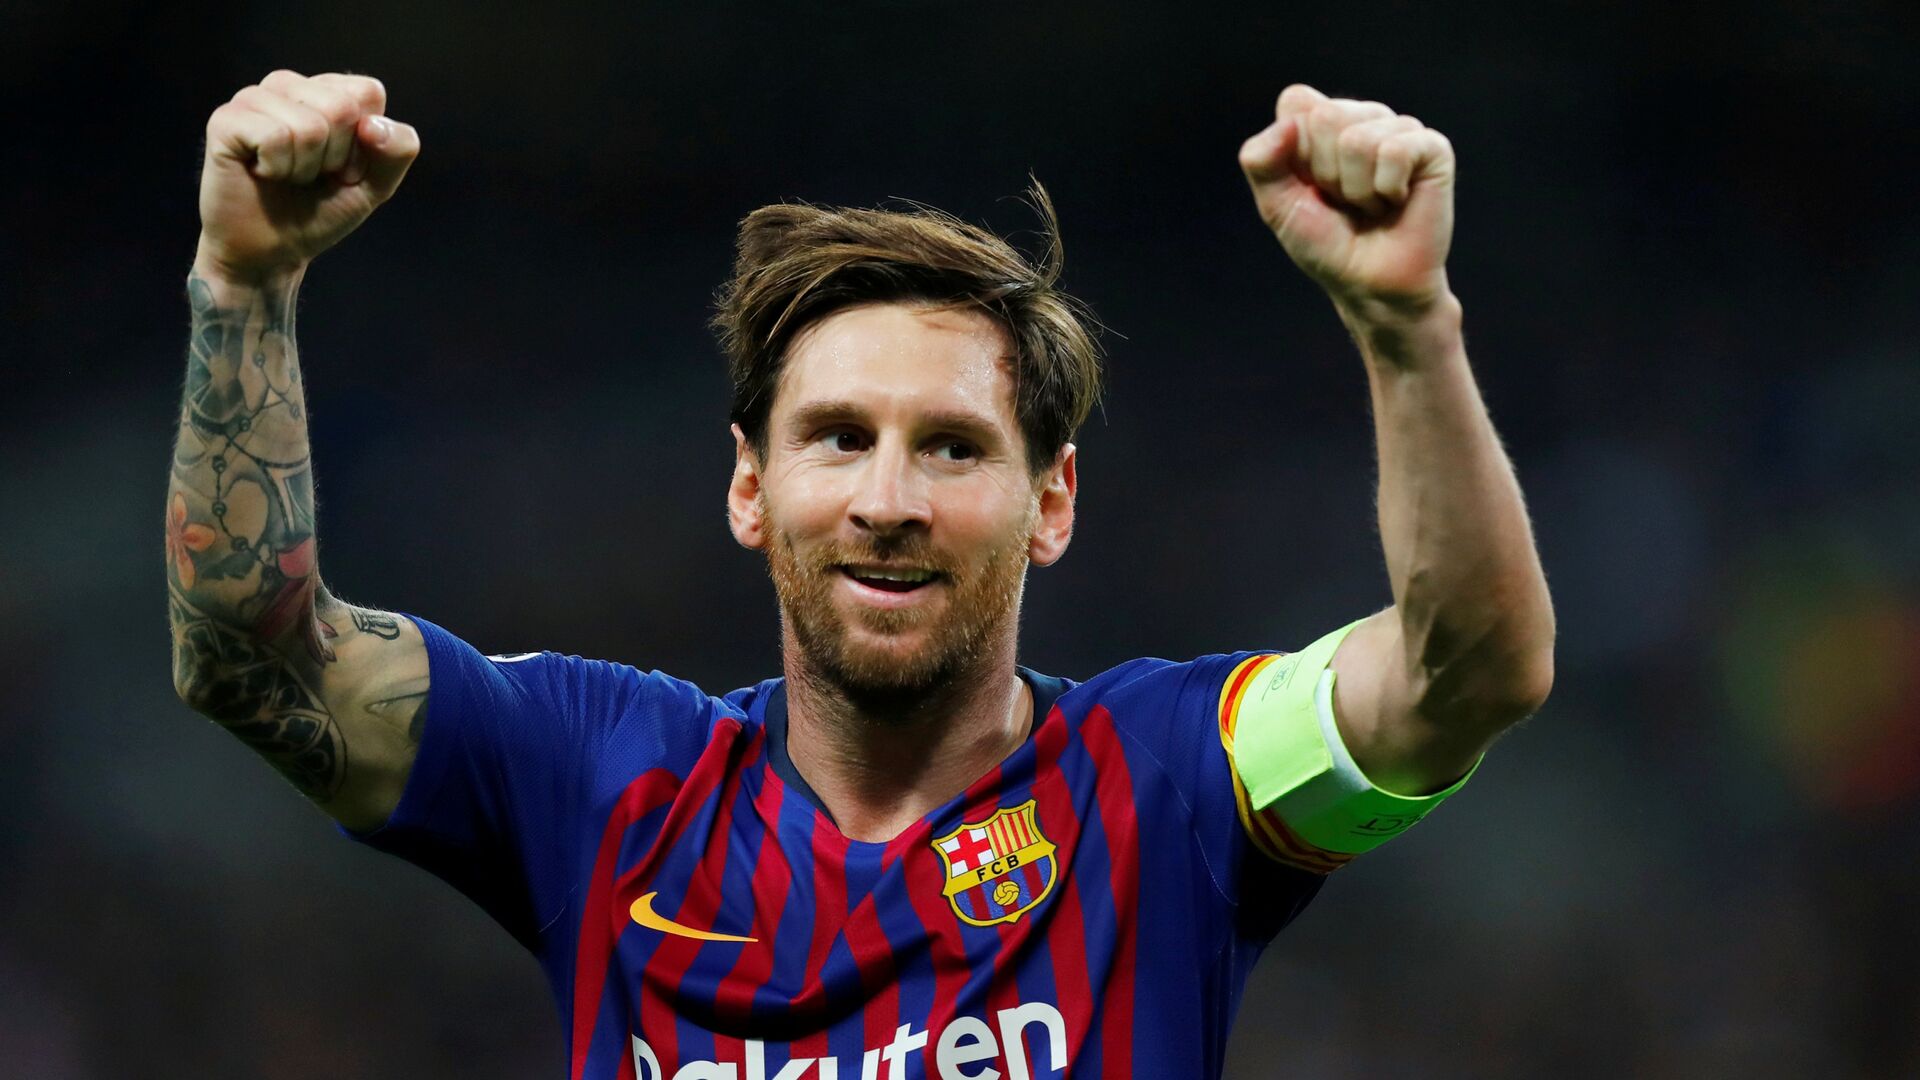 Sony is working on an animated series about Lionel Messi - Esportschimp